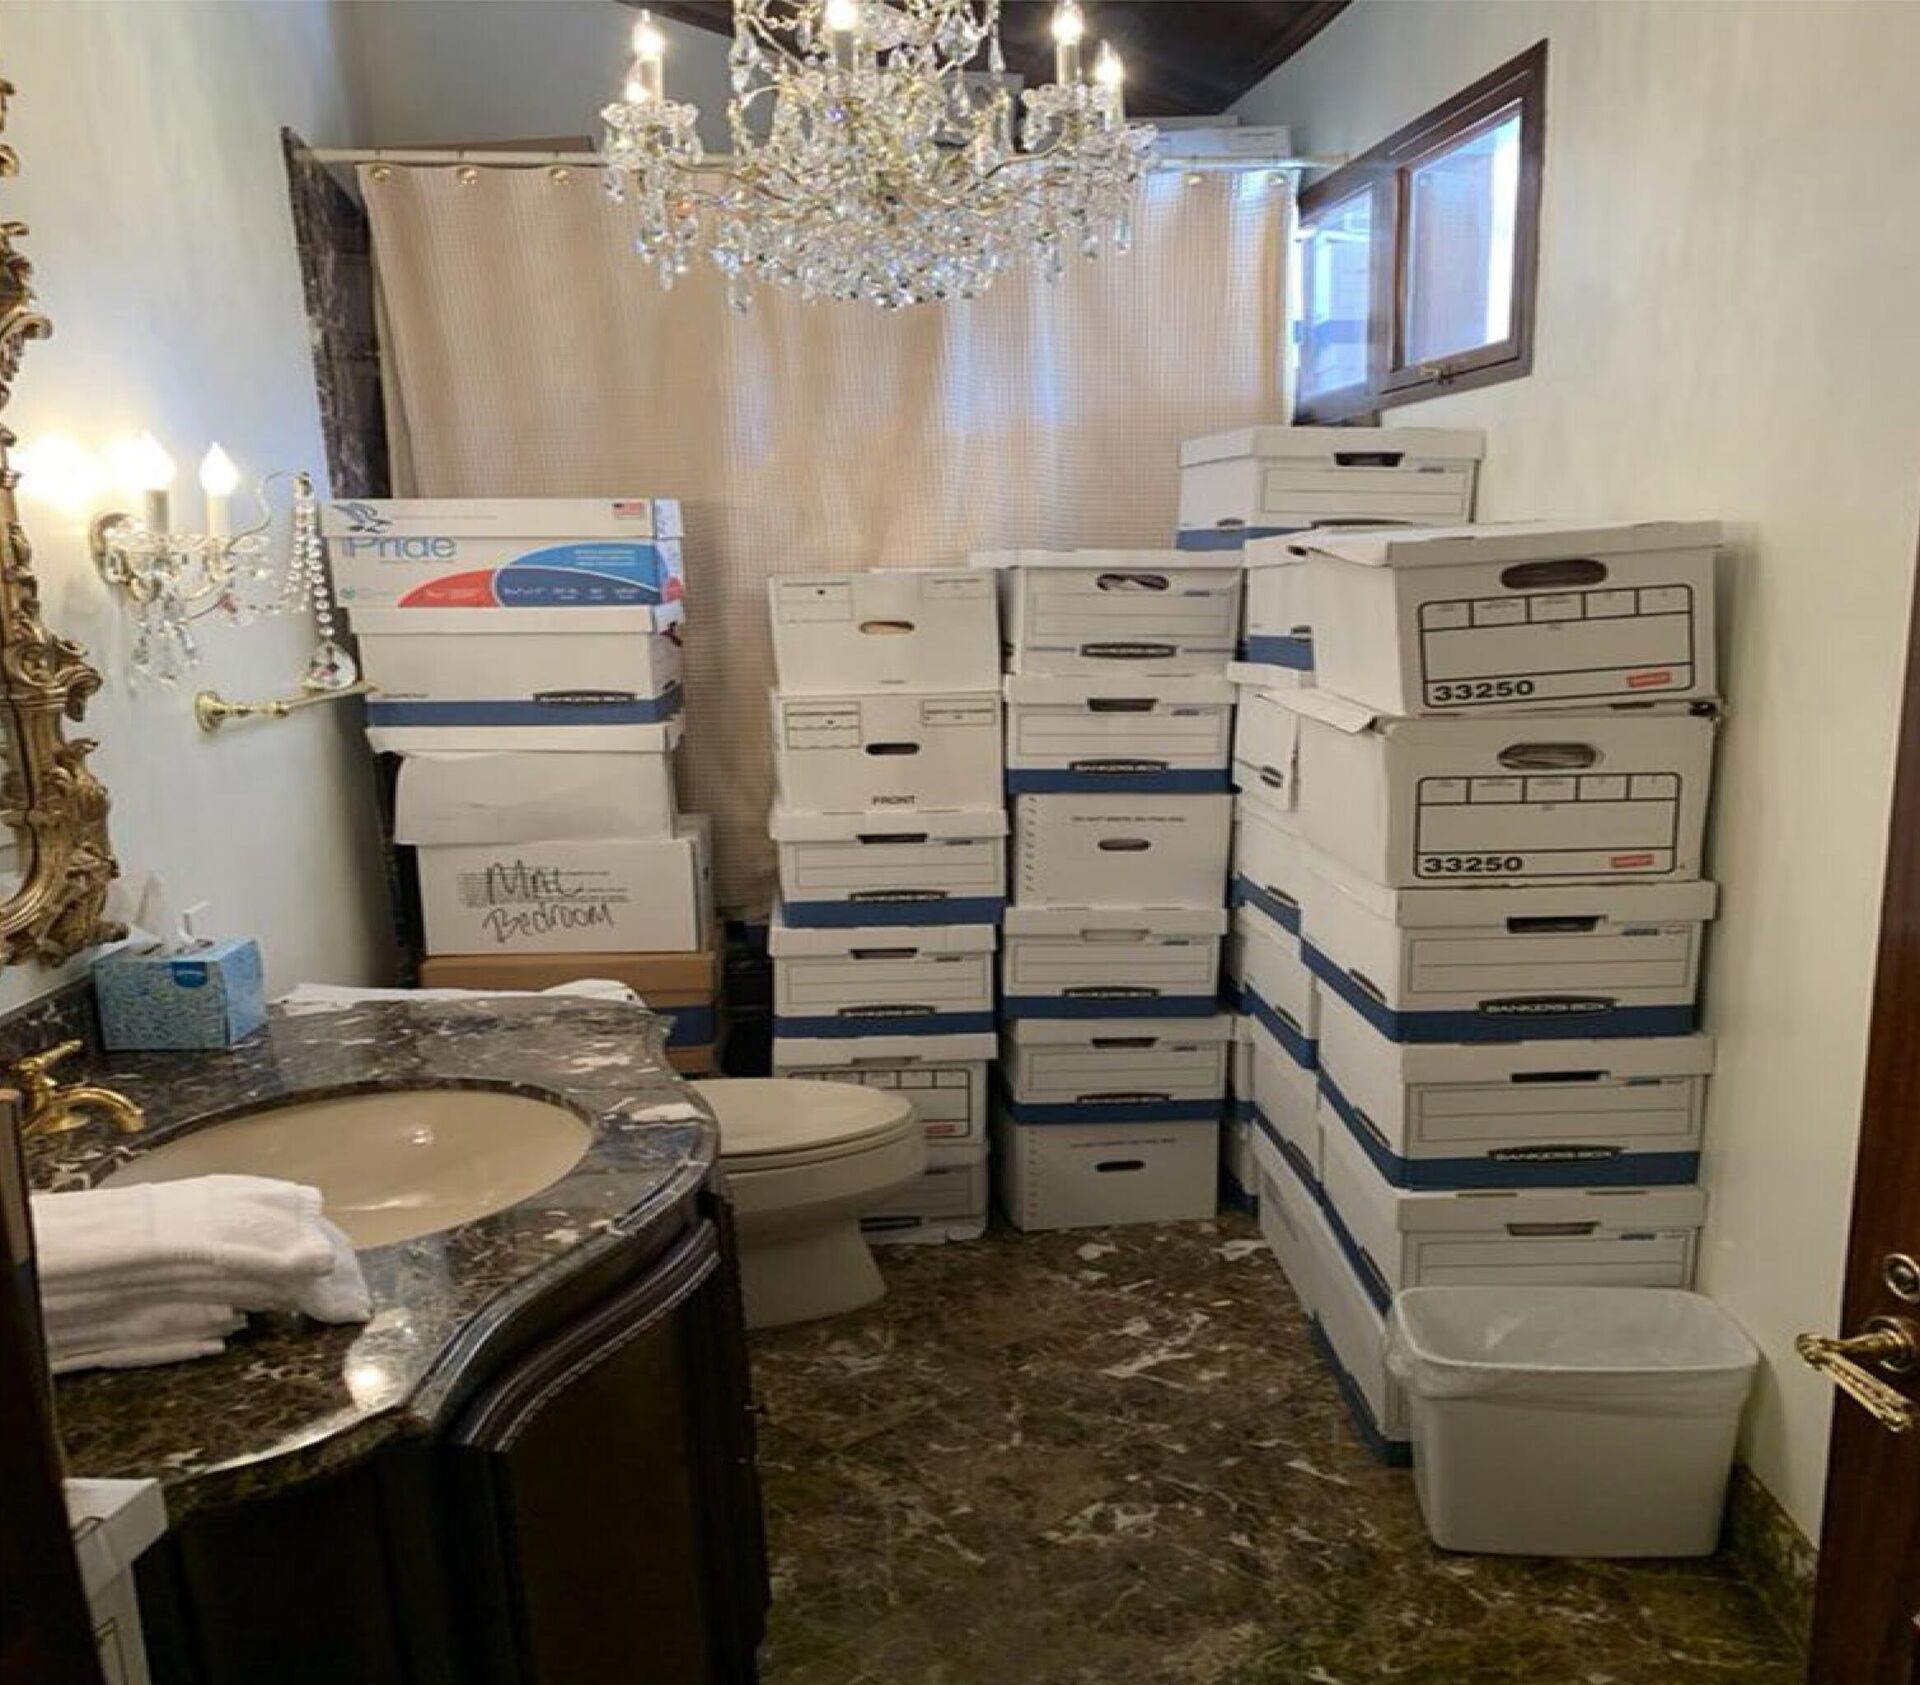 This image, contained in the indictment against former President Donald Trump, shows boxes of records stored in a bathroom and shower in the Lake Room at Trump's Mar-a-Lago estate in Palm Beach, Fla. Trump is facing 37 felony charges related to the mishandling of classified documents according to an indictment unsealed Friday, June 9, 2023. - Sputnik International, 1920, 10.06.2023